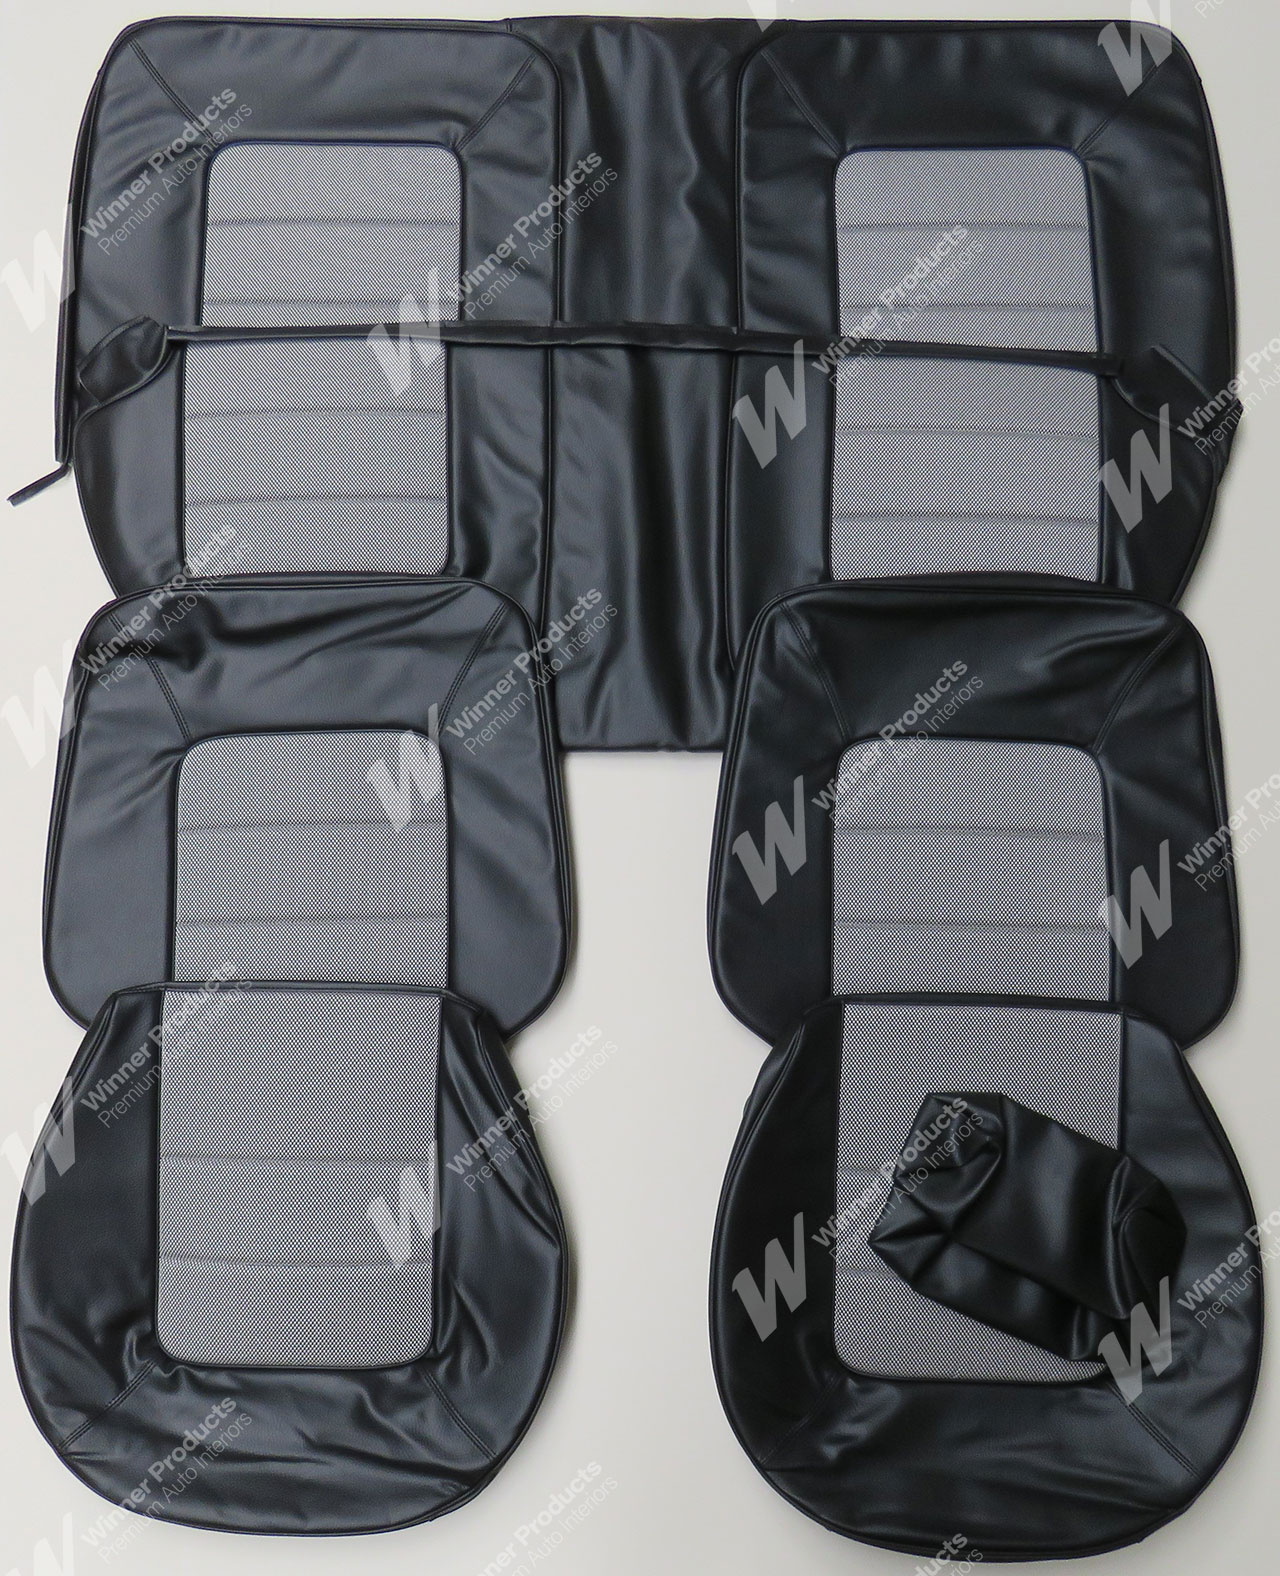 Holden SS HQ SS Sedan 10D Black Seat Covers (Image 1 of 7)